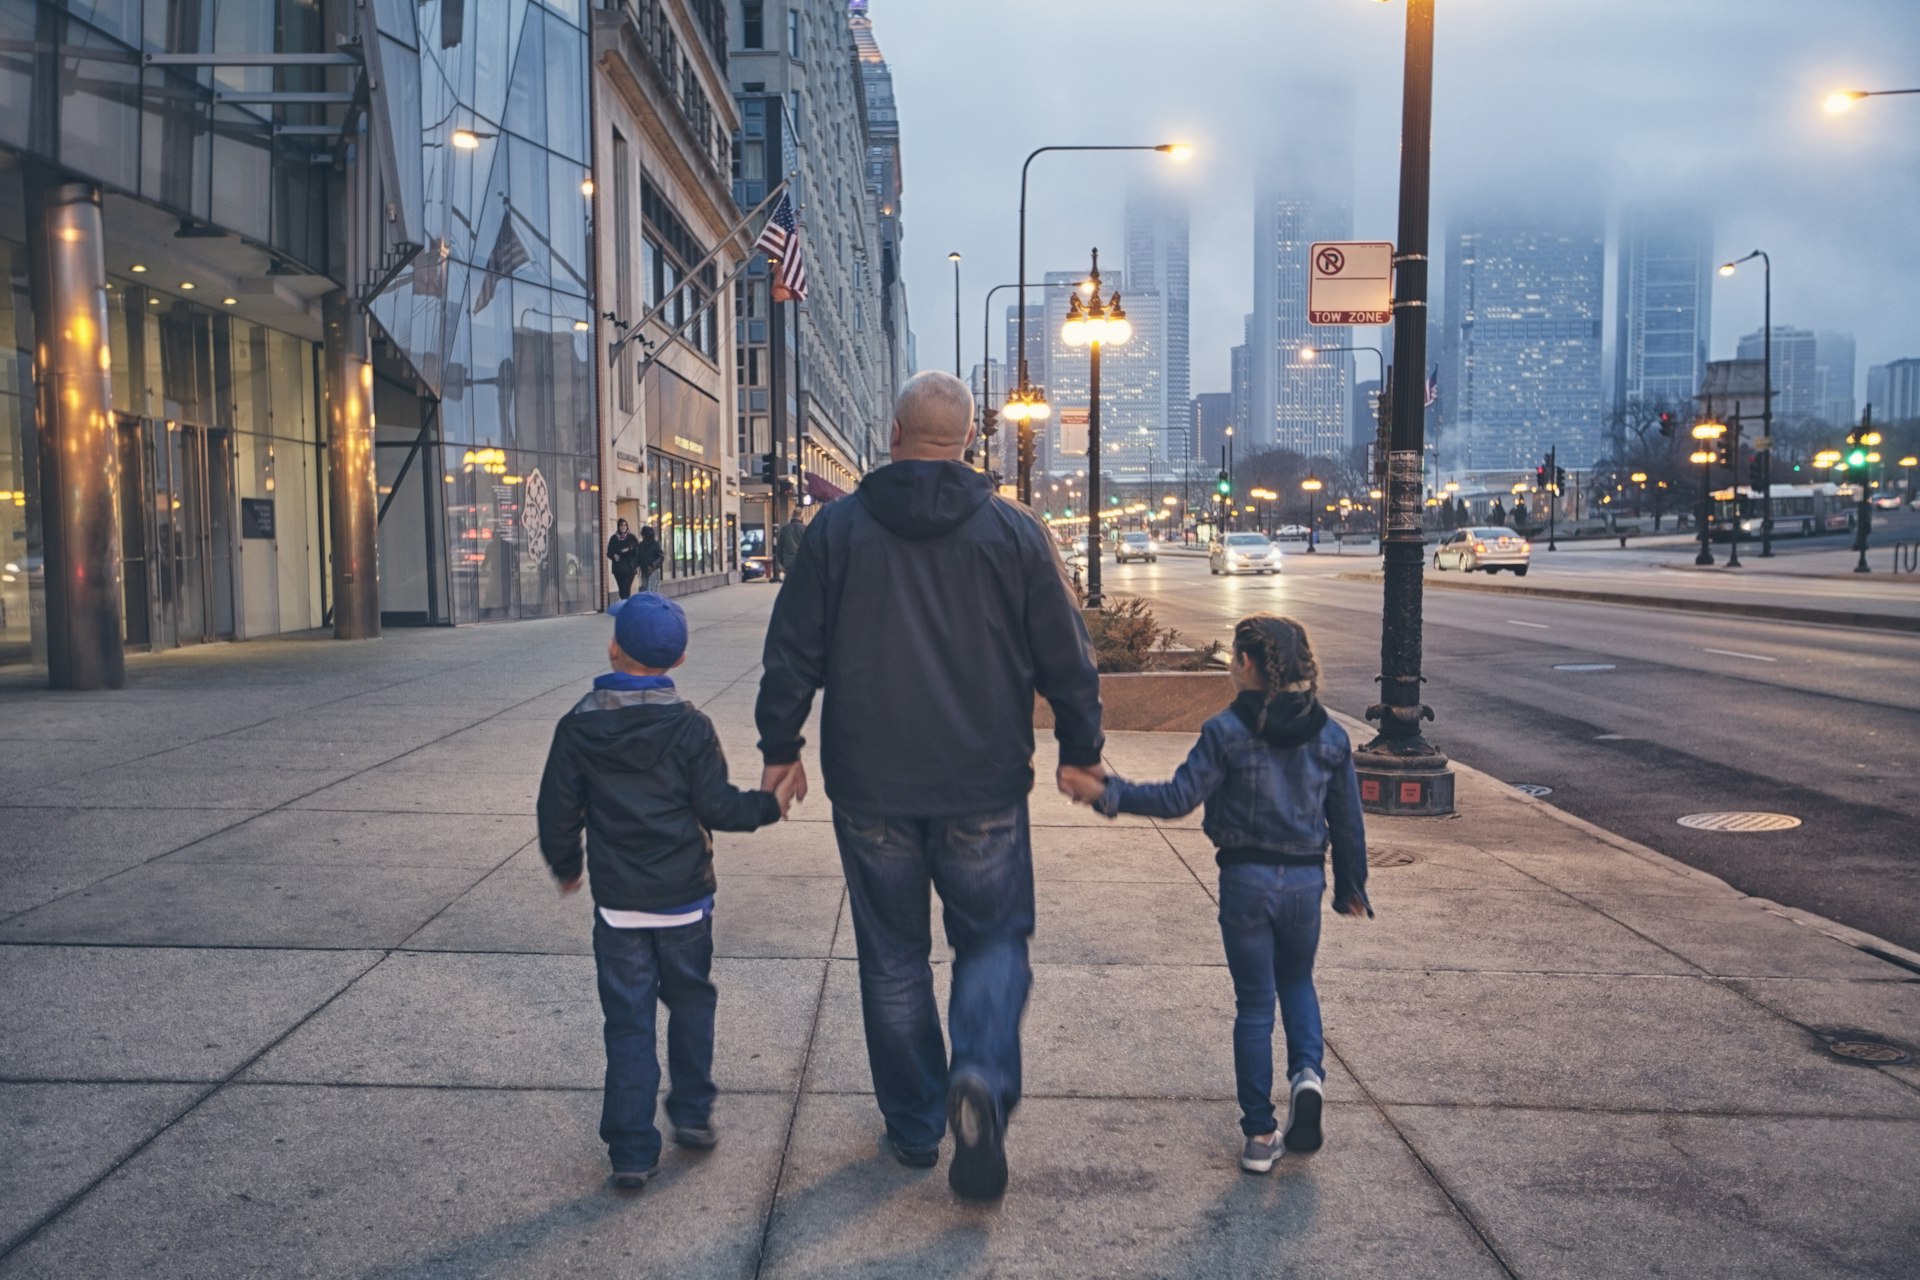 A father and two kids walk down Michigan Avenue in Chicago, Illinois, Midwest, USA